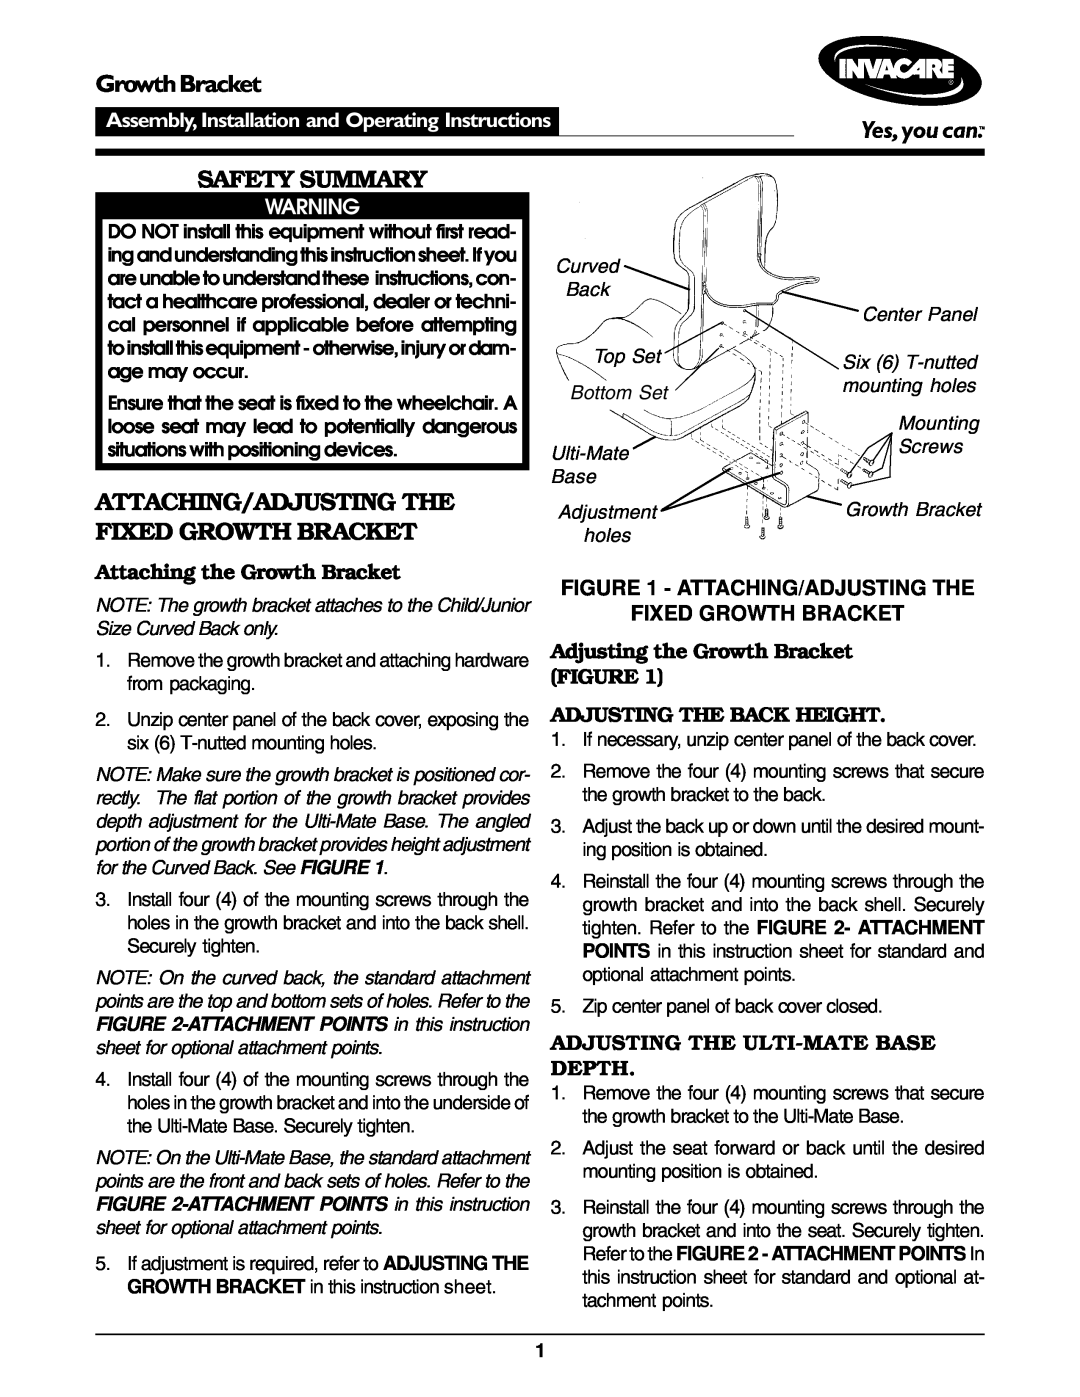 Invacare operating instructions GrowthBracket, Attaching/Adjusting The Fixed Growth Bracket, Safety Summary 